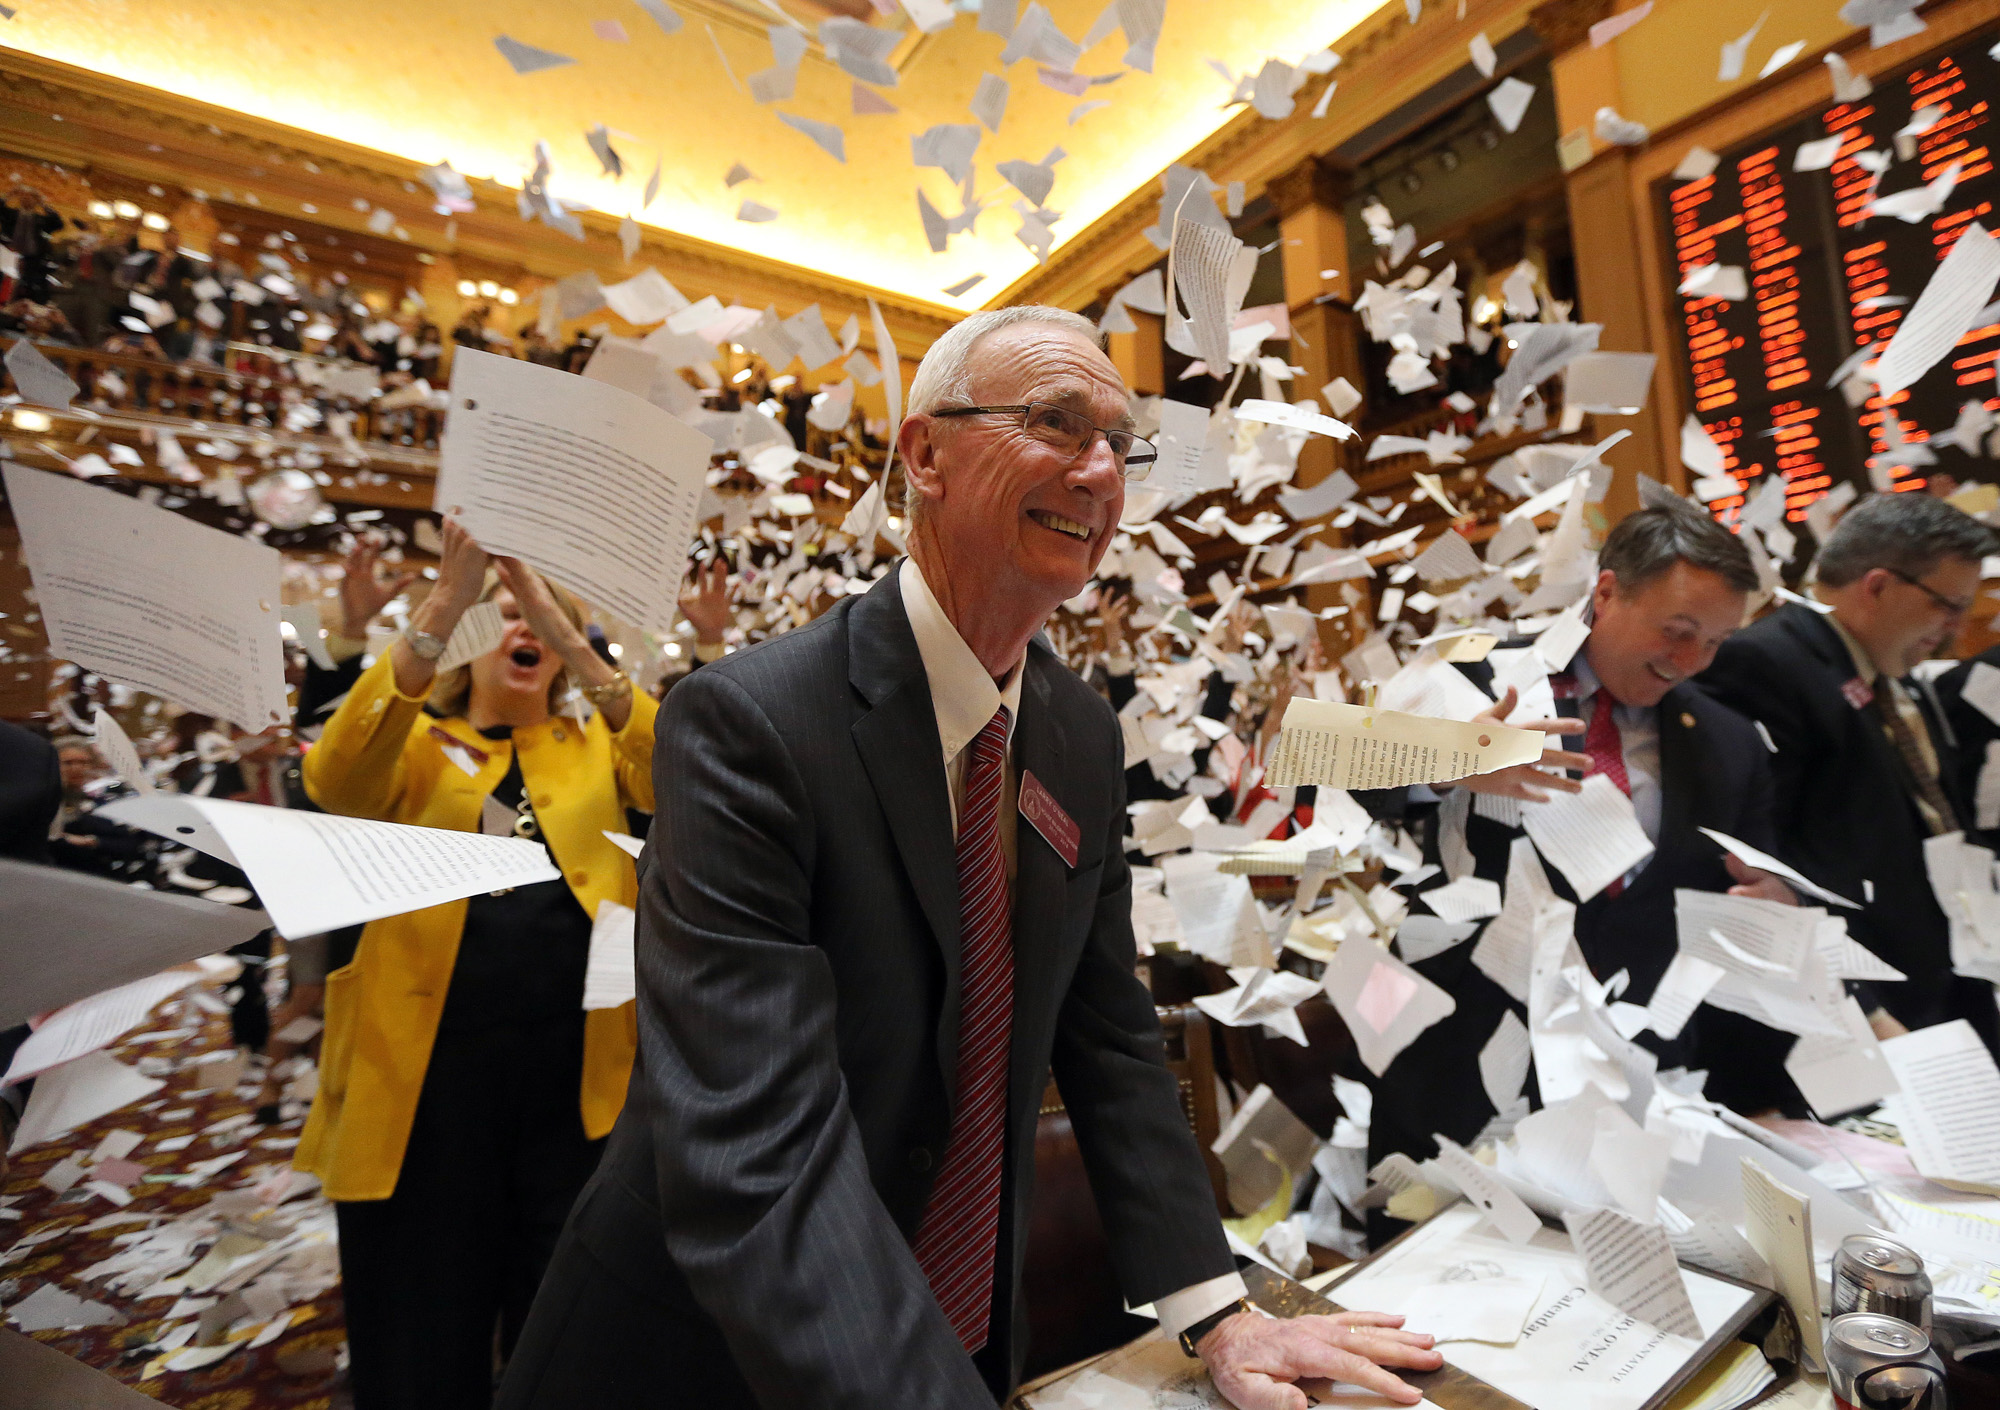 House Majority Leader Larry O'Neal is all smiles as papers fly through the air just after midnight when the 2014 Legislative session comes to a close. In an annual tradition, Legislators celebrate the end of the session with their own version of confetti made from printed copies of bills and resolutions.